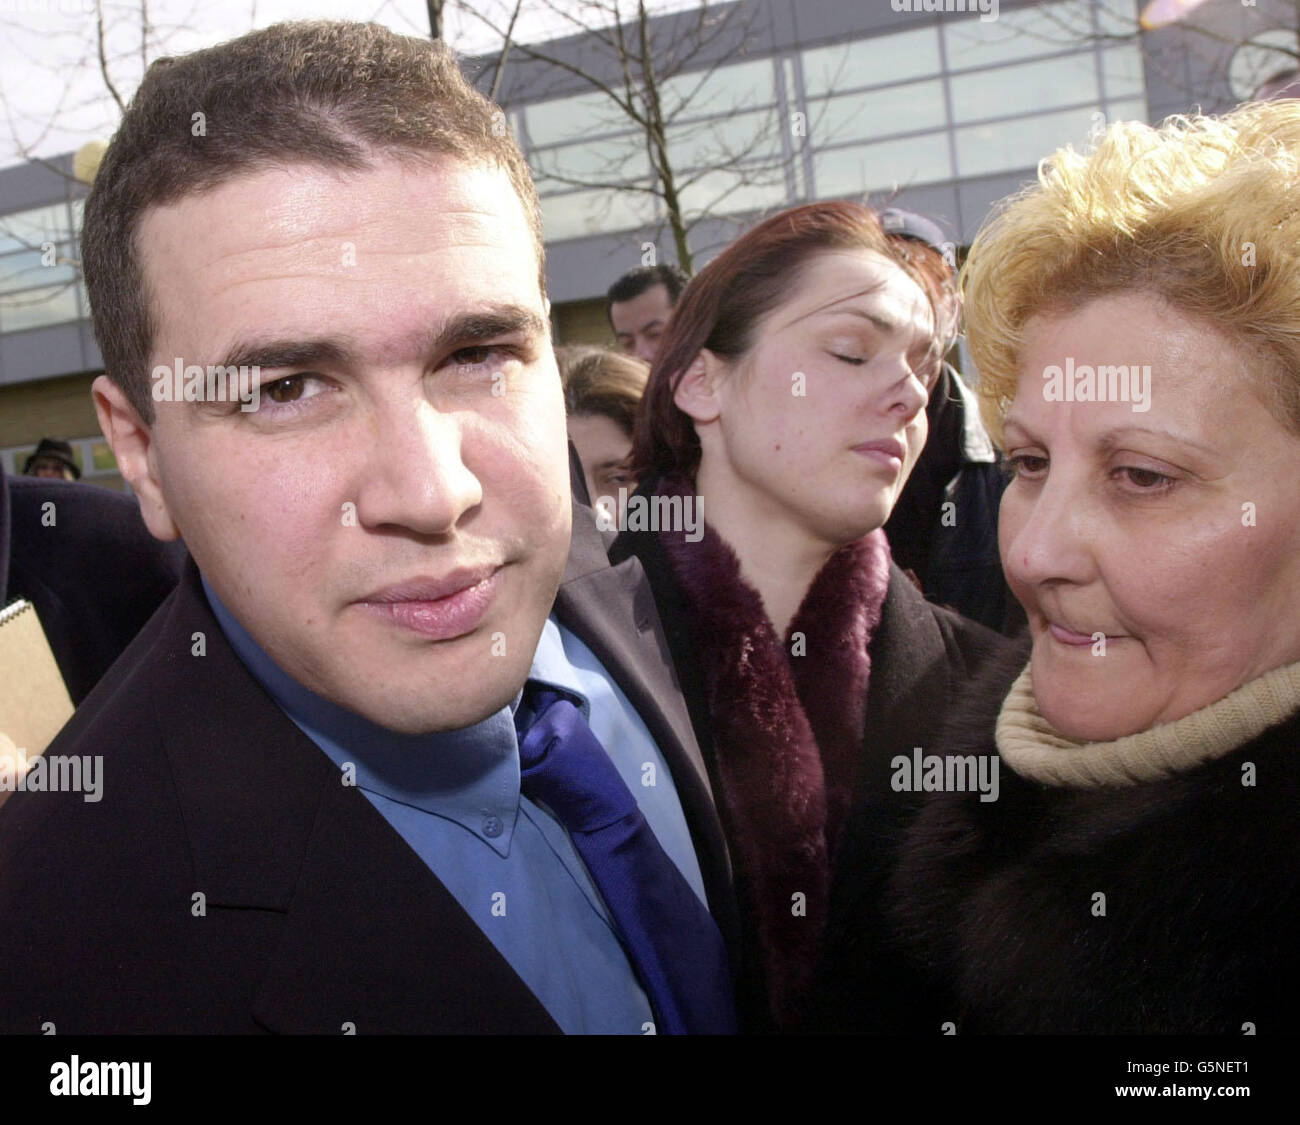 Algerian pilot Lotfi Raissi, 27, who has been accused of training the suicide hijackers who crashed into the Pentagon on September 11, walks free from Belmarsh Magistrates Court in south-east London with his wife Sonya (centre) and mother Rabea. * after he was granted bail Tuesday February 12, 2002 at an extradition hearing. District Judge Timothy Workman said Raissi, who lives near Heathrow airport, said that he could have conditional bail as he was only facing extradition to the US on two counts of falsifying an application for a US pilot's licence. Stock Photo